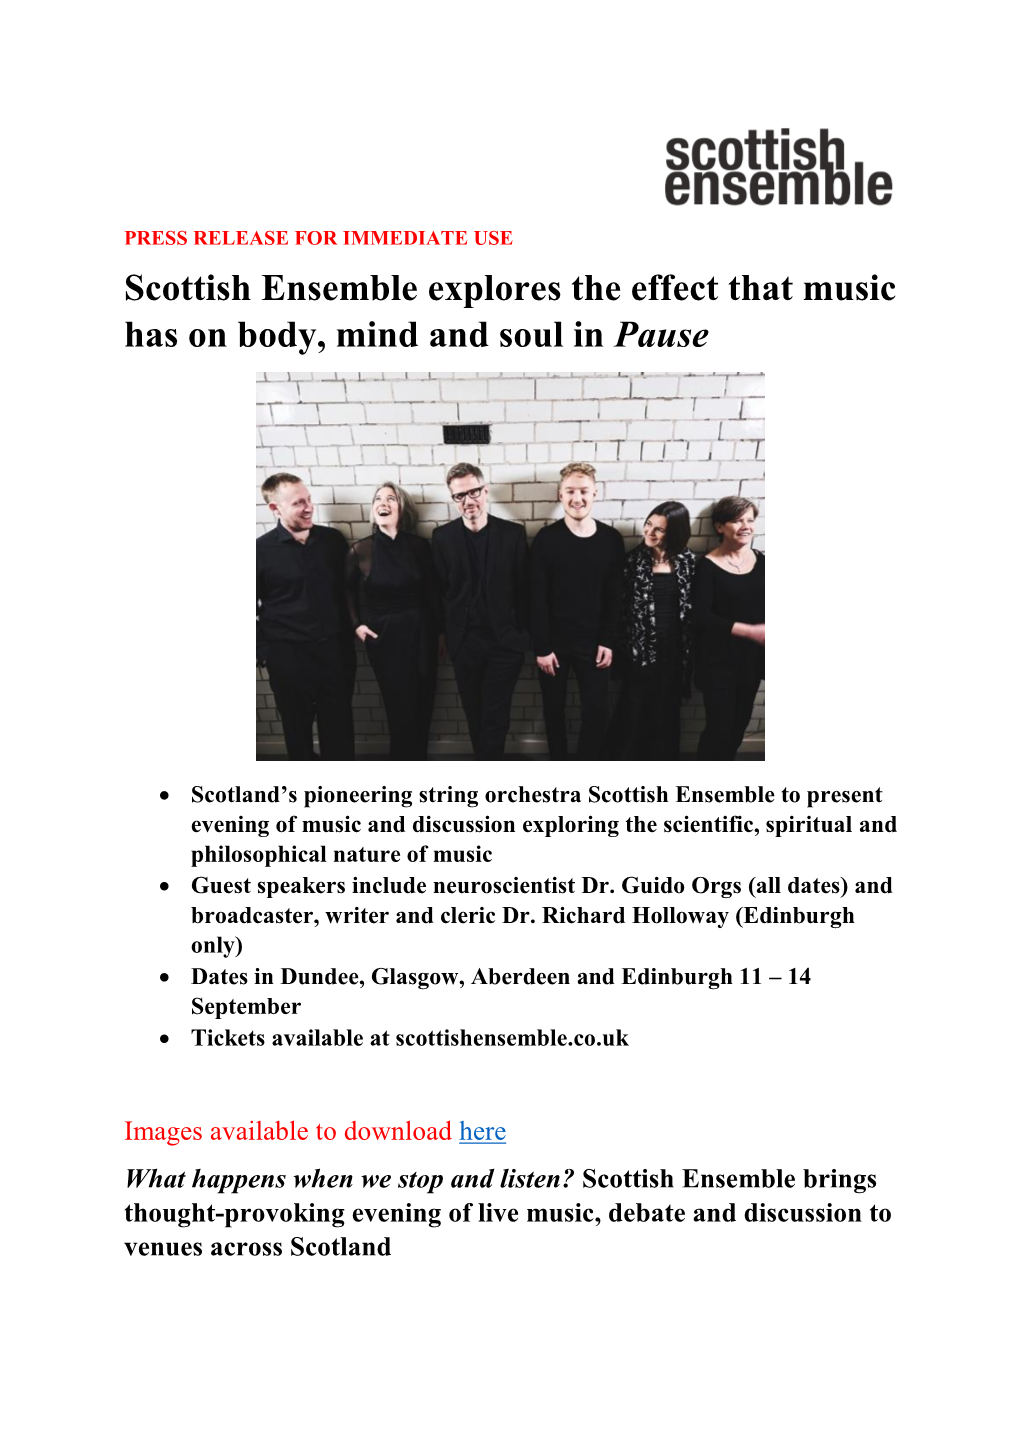 Scottish Ensemble Explores the Effect That Music Has on Body, Mind and Soul in Pause